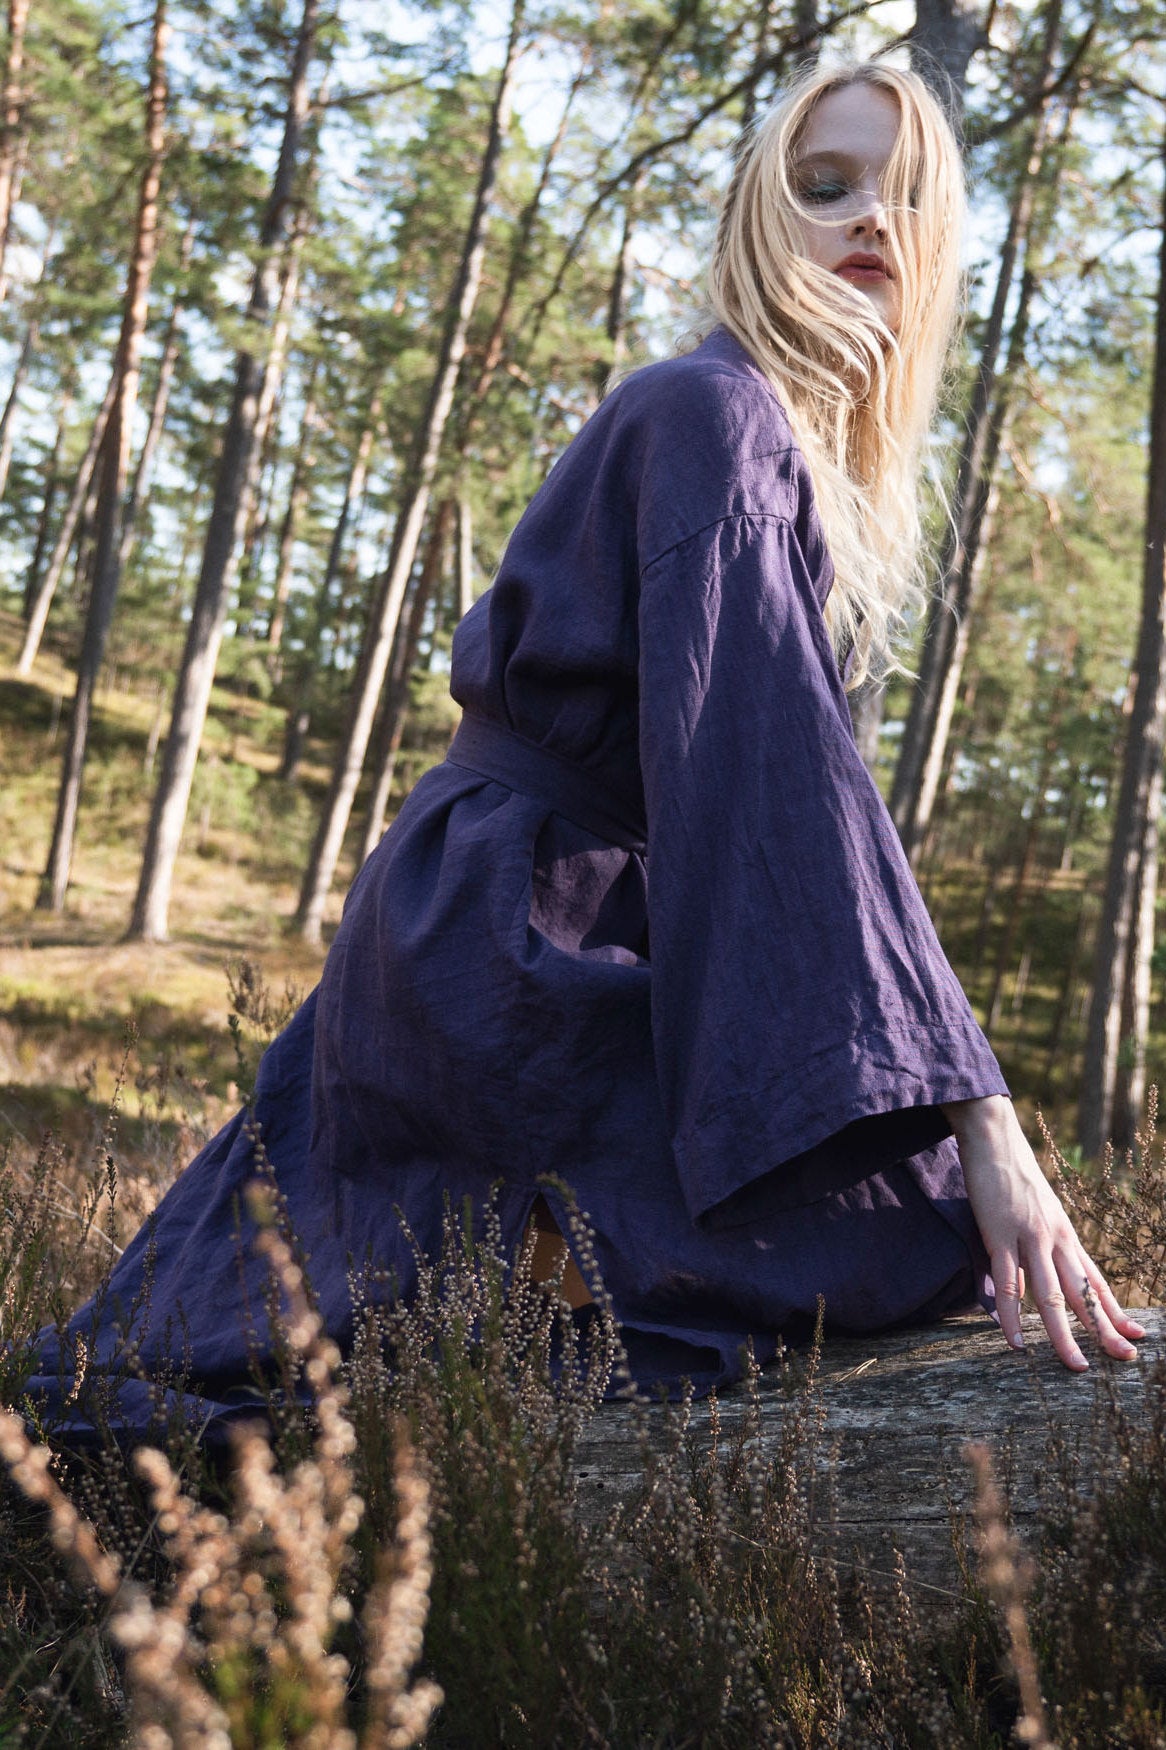 Organic, sustainable and sexy at the same time! Agasåga long purple kimono with splits, long sleeves and belt. Below knee length bathrobe. This robe is natural, soft, breathable and pure. It’s a conscious and healthy choice for your body and environment that embraces genuine selflove and selfcare. Handmade with love in the North.